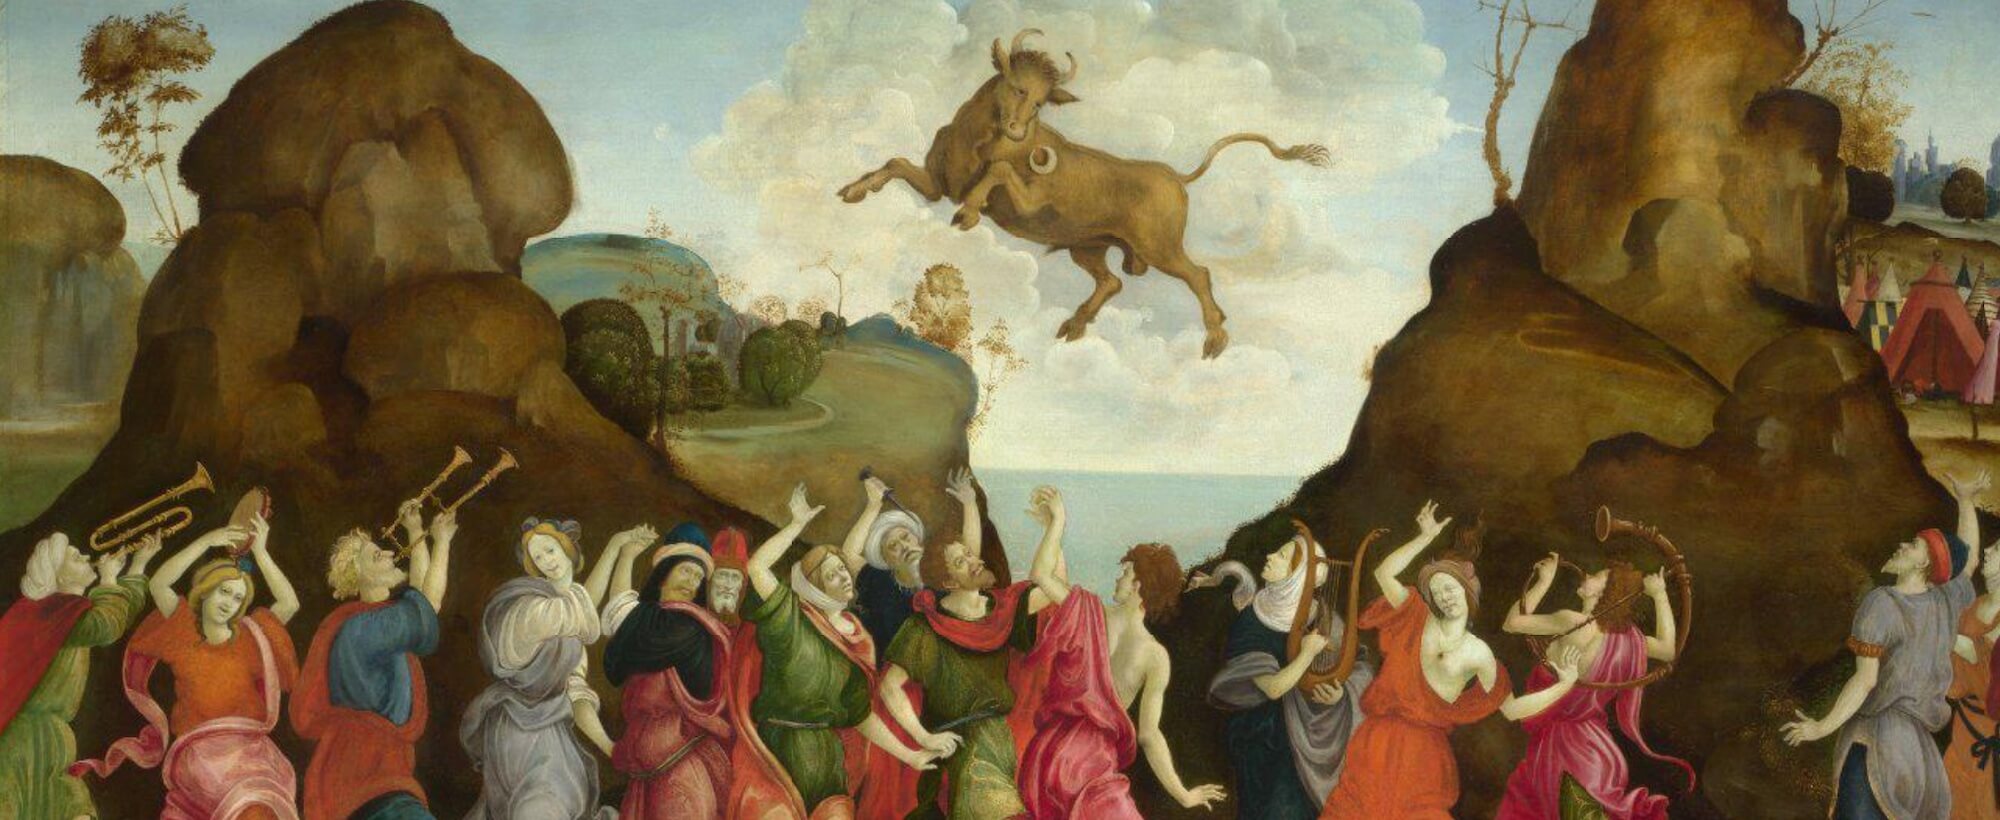 The worship of the Golden Calf in the form of an Apis Bull. Filippino Lippi or follower, Florence, c. 1500. London National Gallery, inv. 4904.